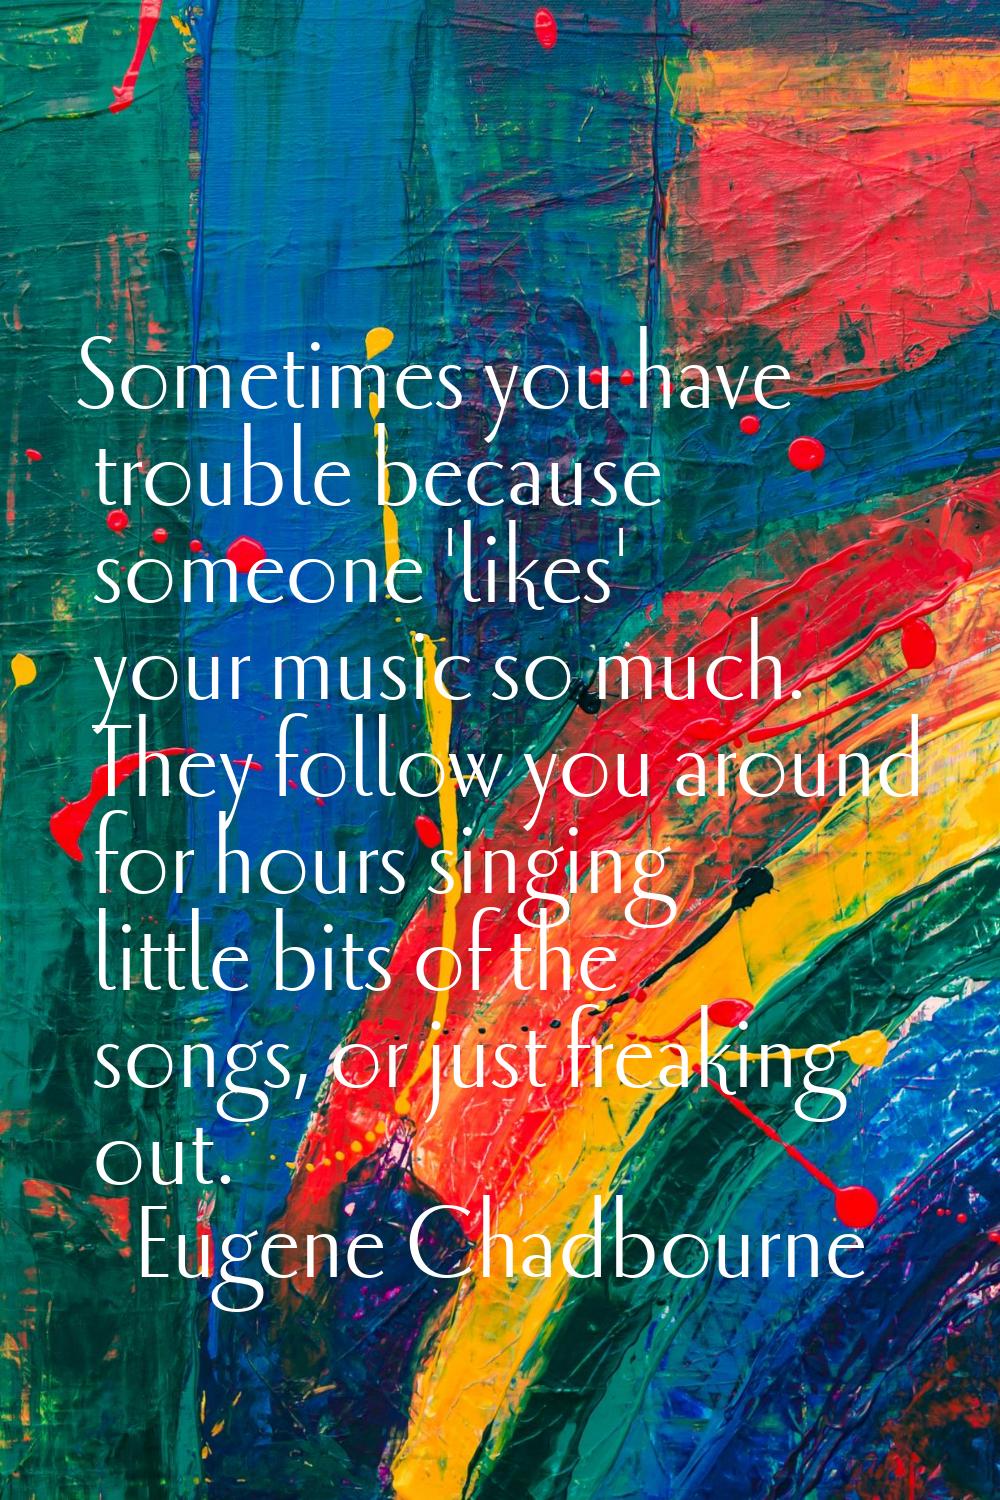 Sometimes you have trouble because someone 'likes' your music so much. They follow you around for h